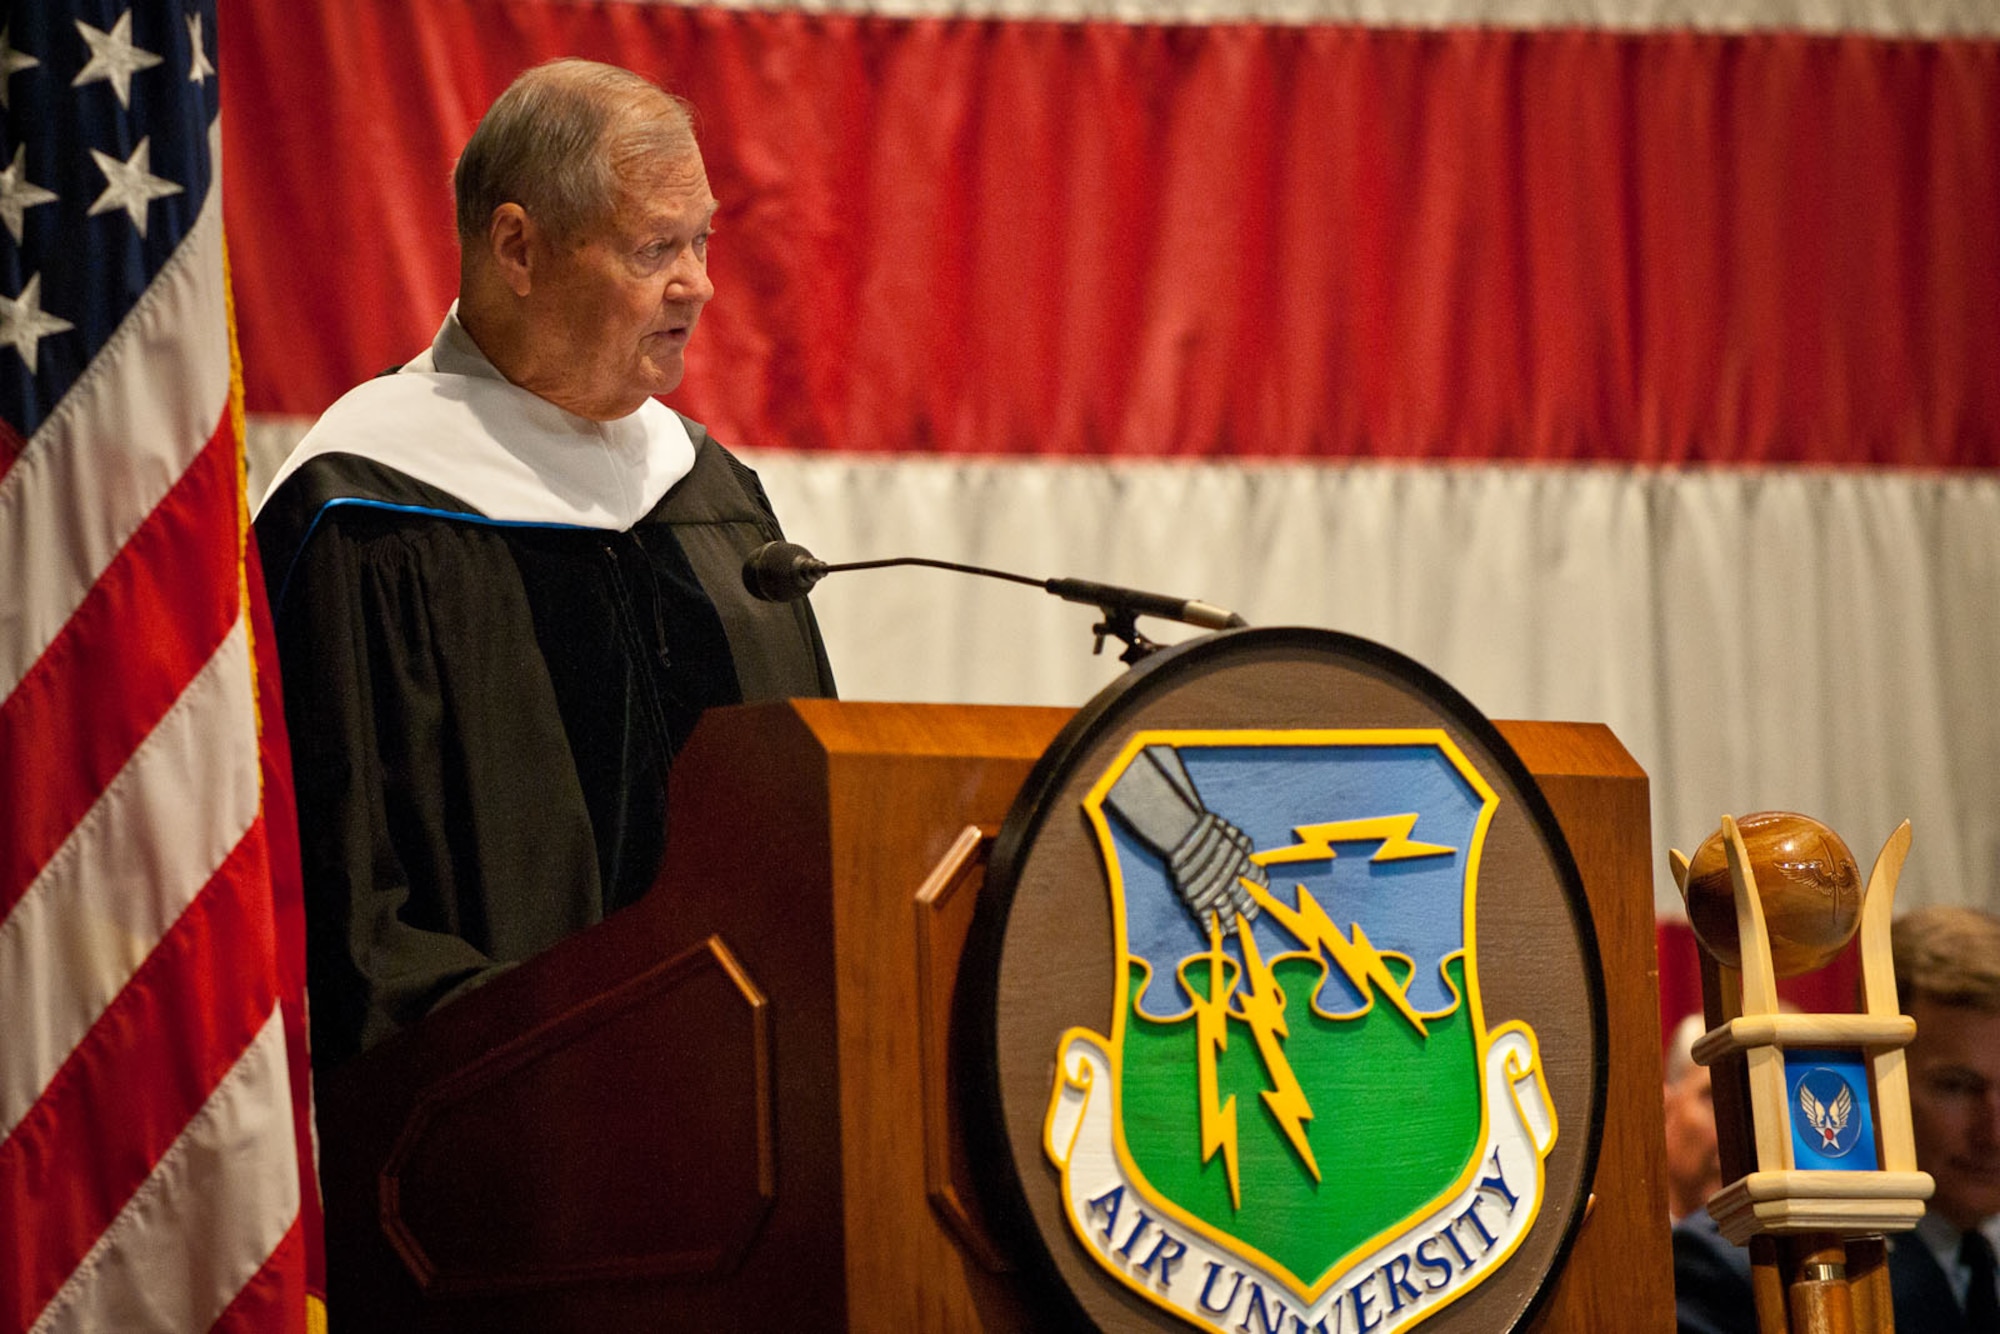 The Honorable Isaac N. Skelton IV, former U.S. Representative from Missouri and chairman of the House Armed Services Committee speaks to attendees after being awarded The Doctor of Law, Honoris Causa by The Air University. Ceremony was held Monday, 5 Nov 2012 in Polifka Auditorium on the campus of Squadron Officer College located on Maxwell Air Force Base, Montgomery, Ala. (U.S. Air Force photo by Donna L. Burnett)